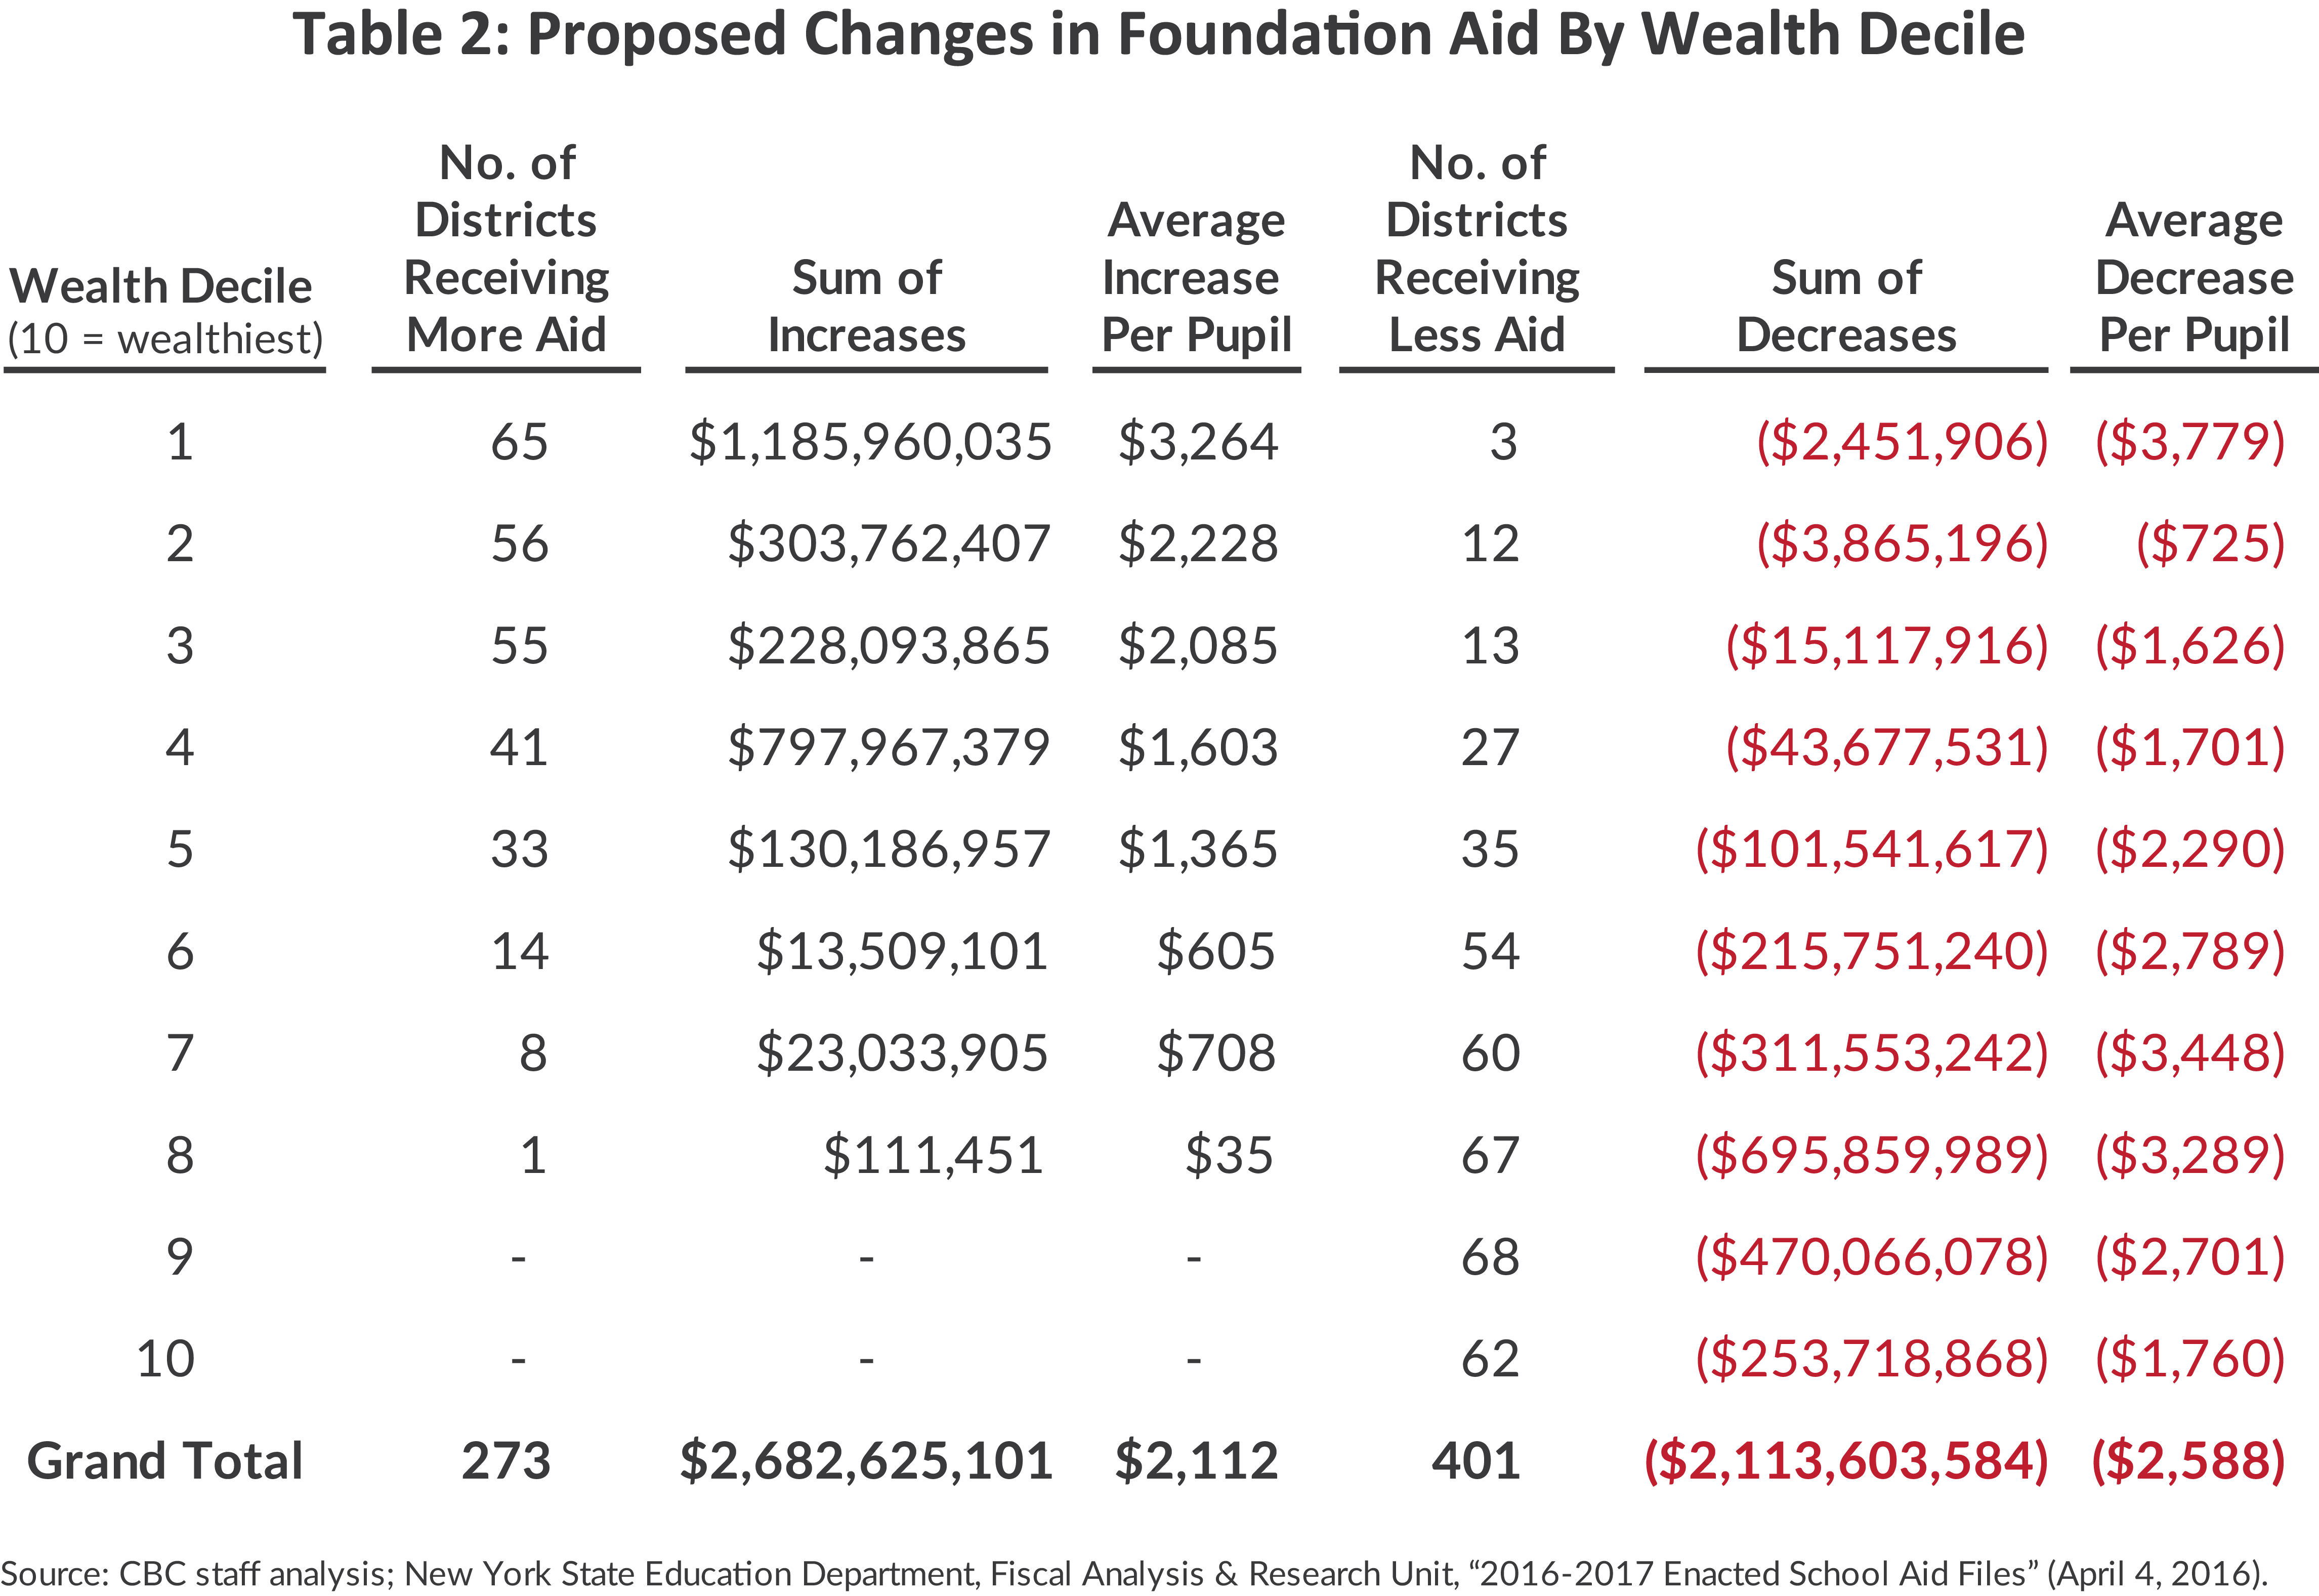 Table: Proposed Changes in Foundation Aid by Wealth Decile